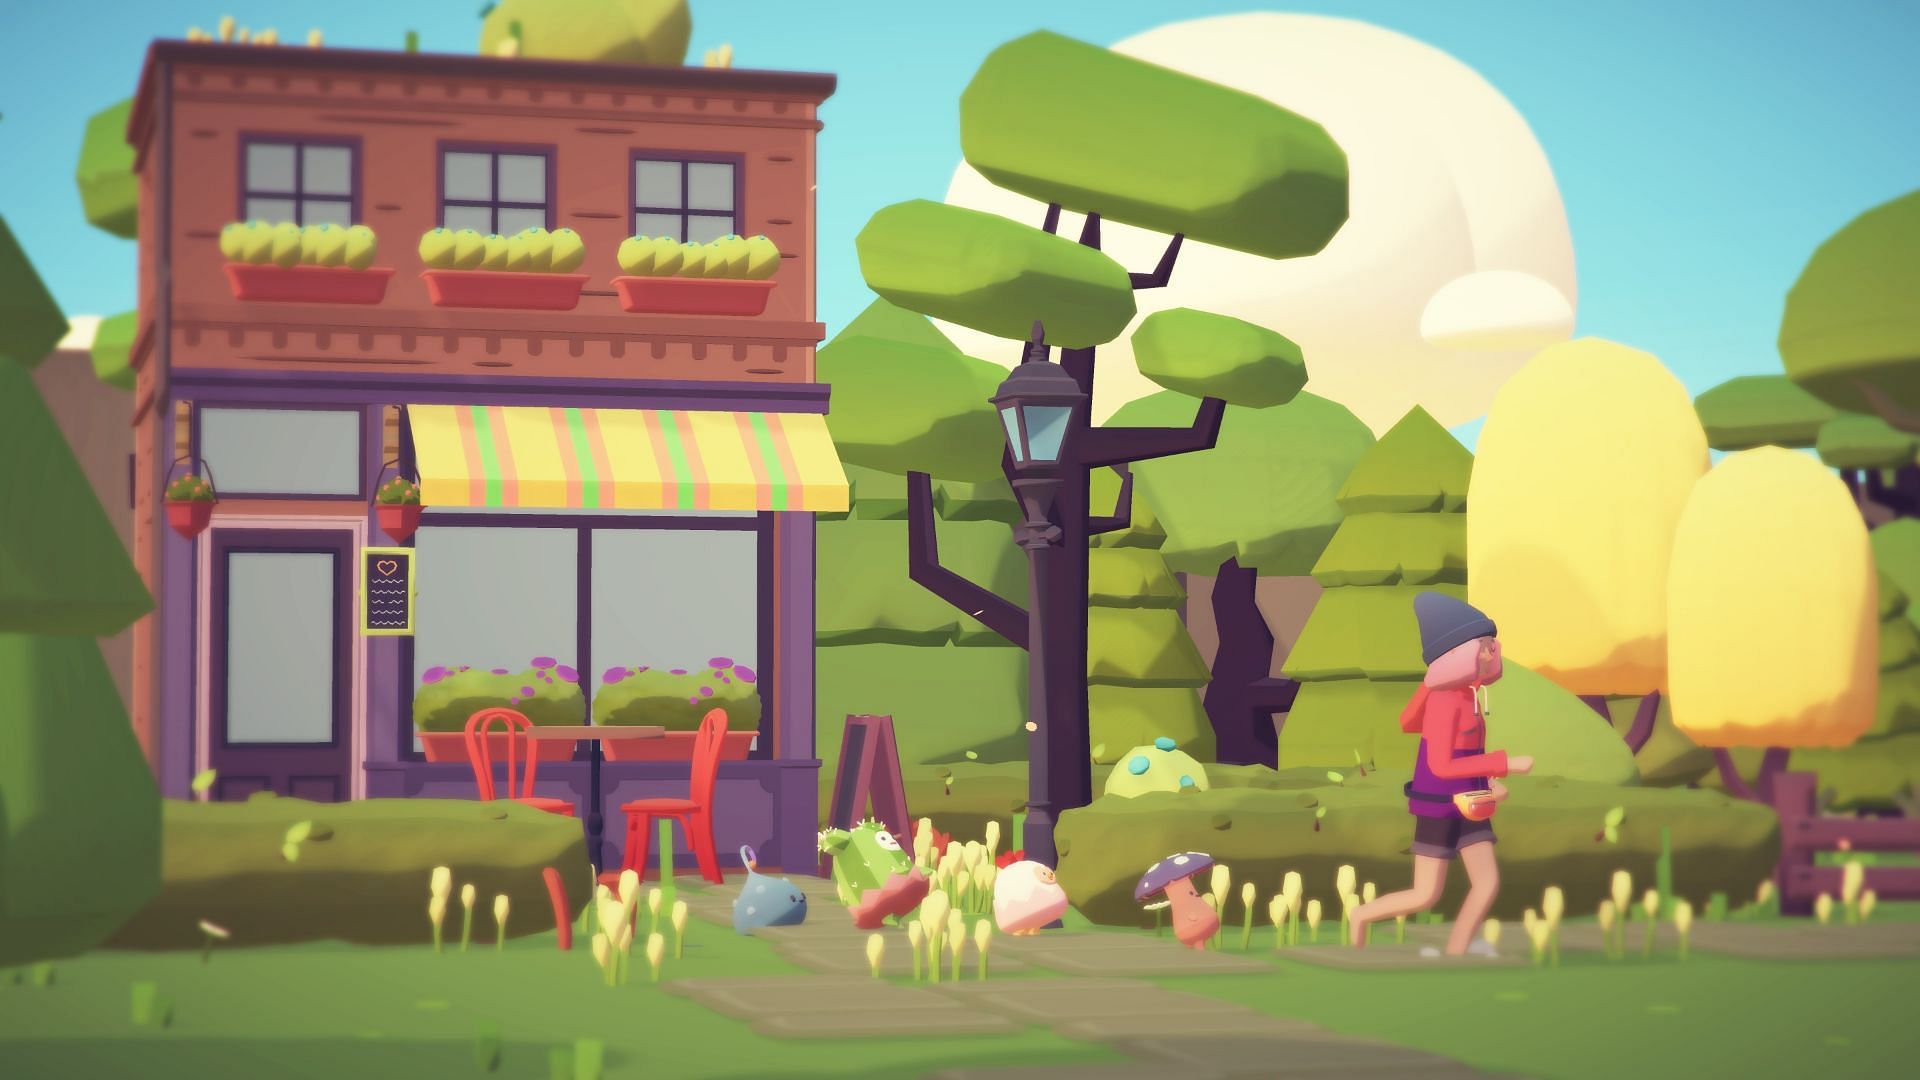 Go on a journey with your little cute ooblets as companions. (Image via Glumberland)